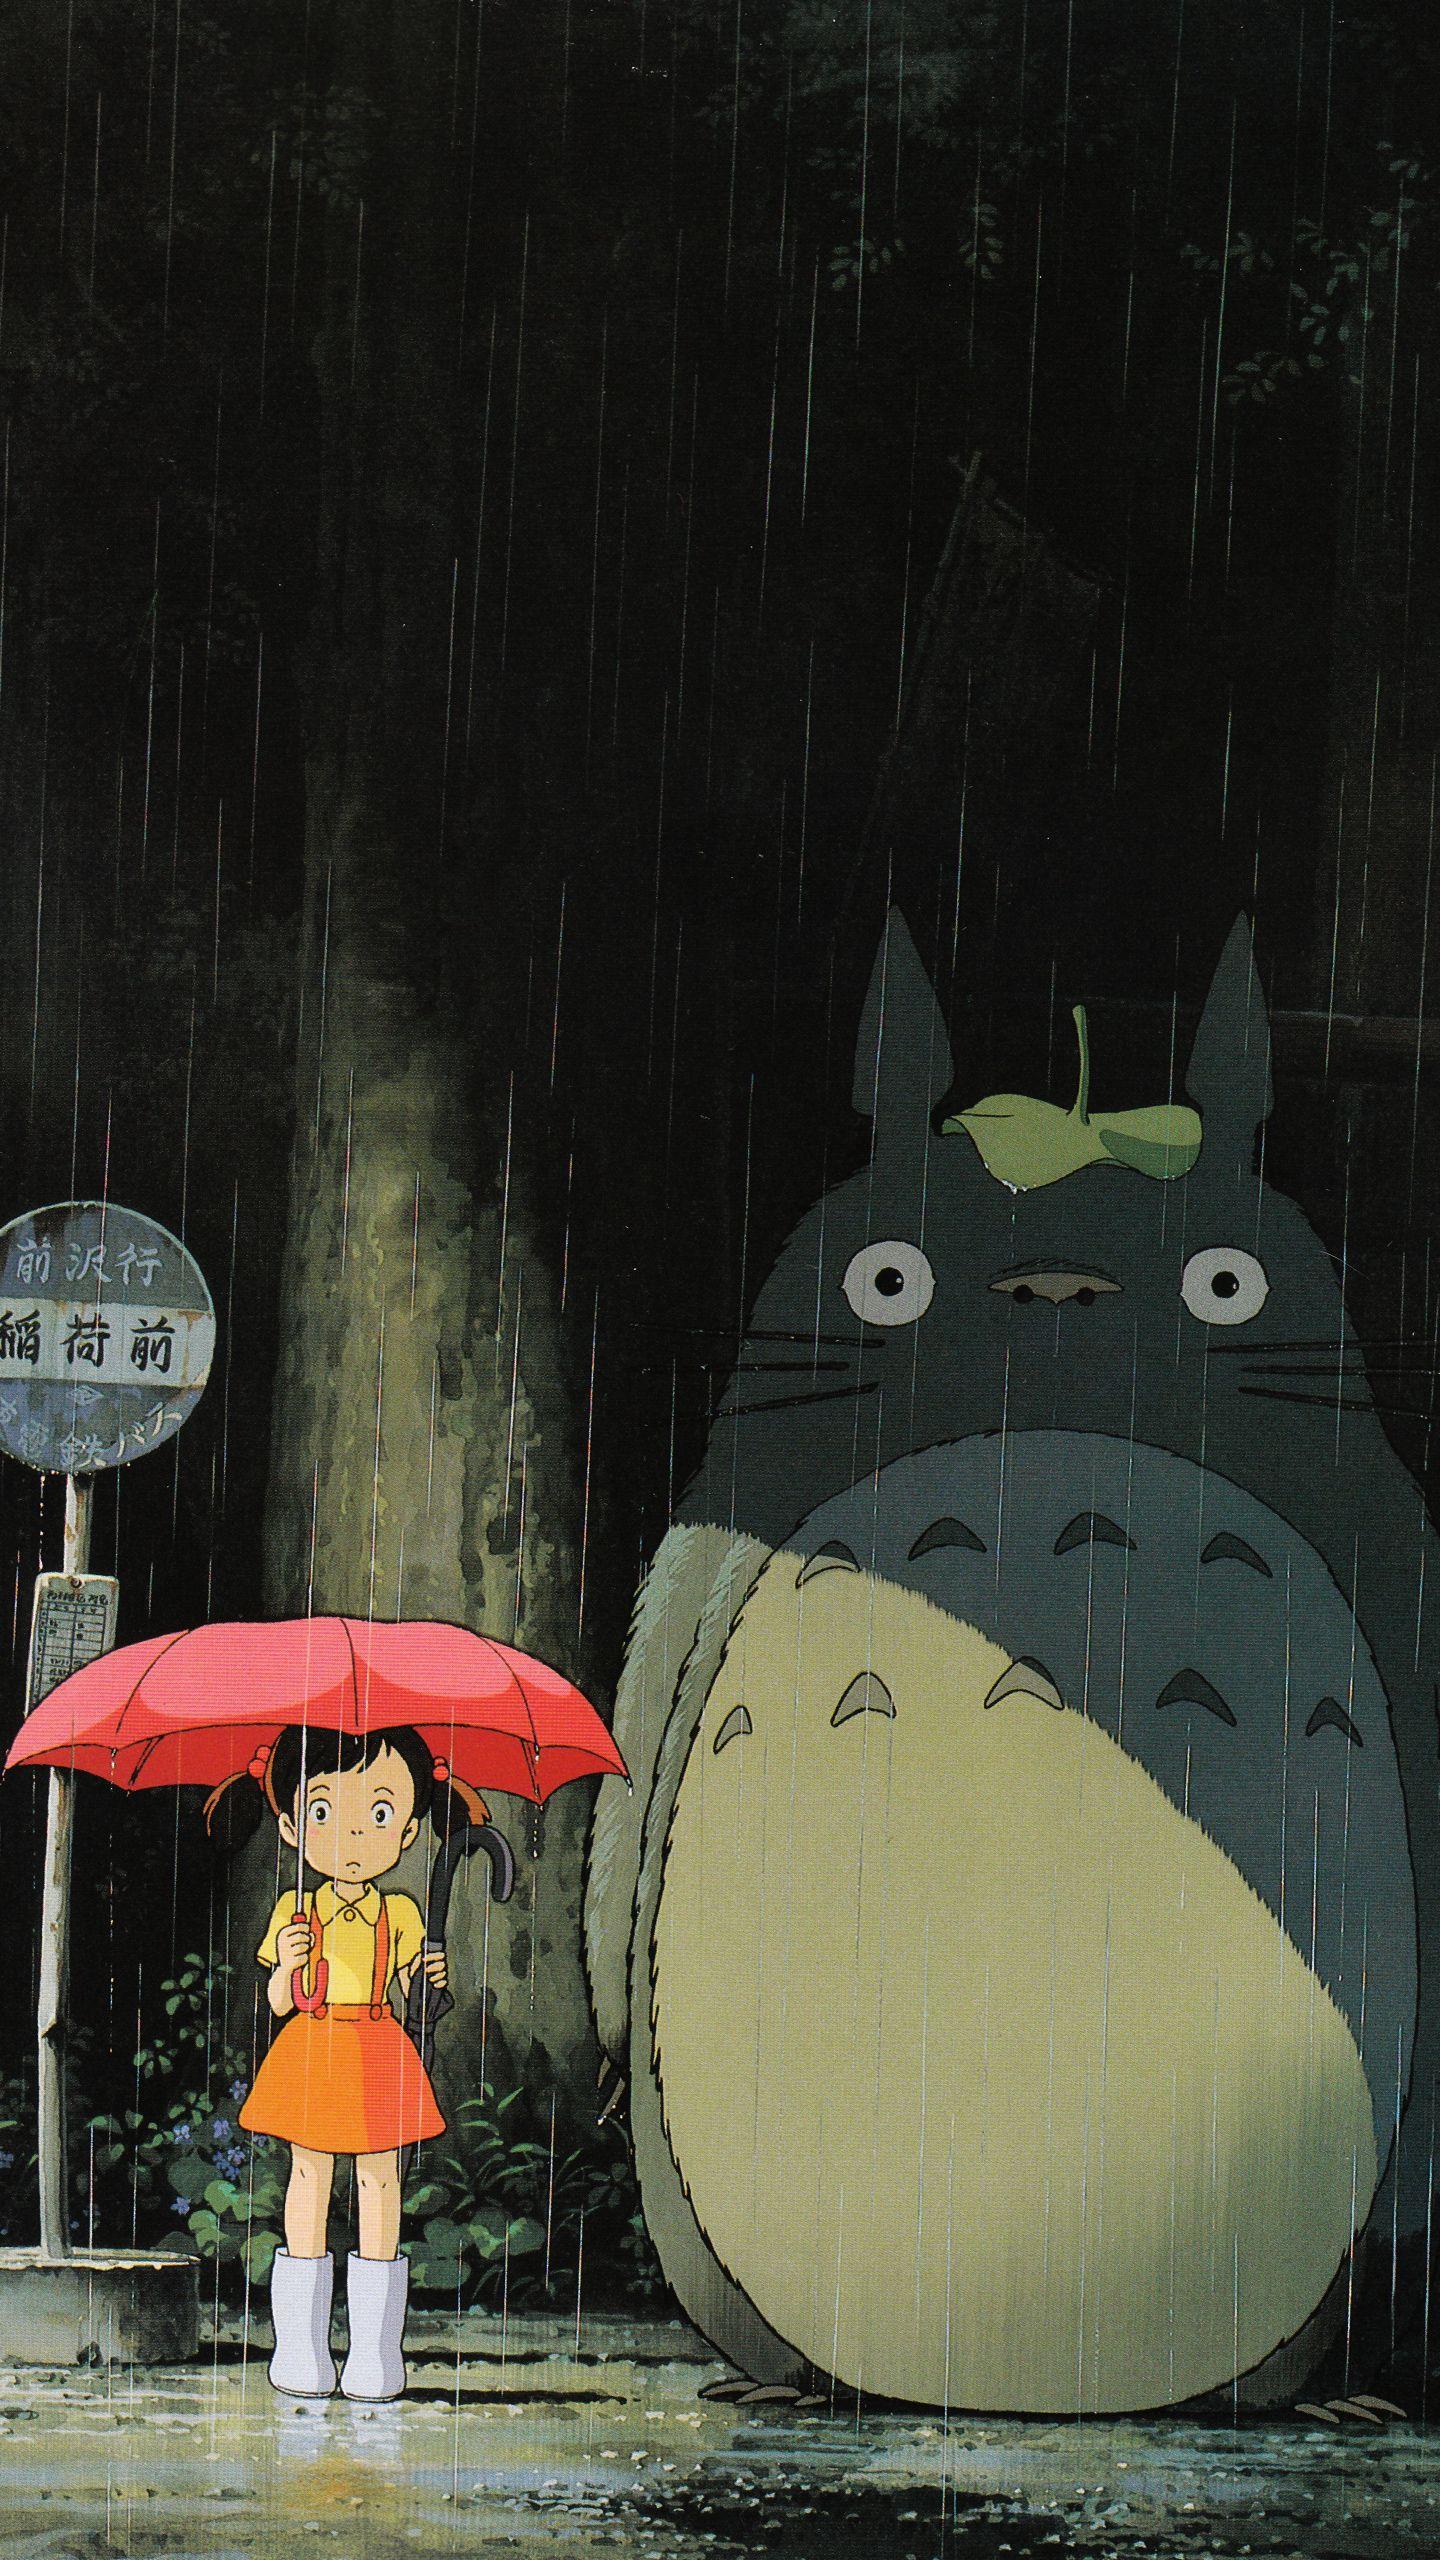 Totoro Mobile Wallpapers - Top Free Totoro Mobile Backgrounds ...